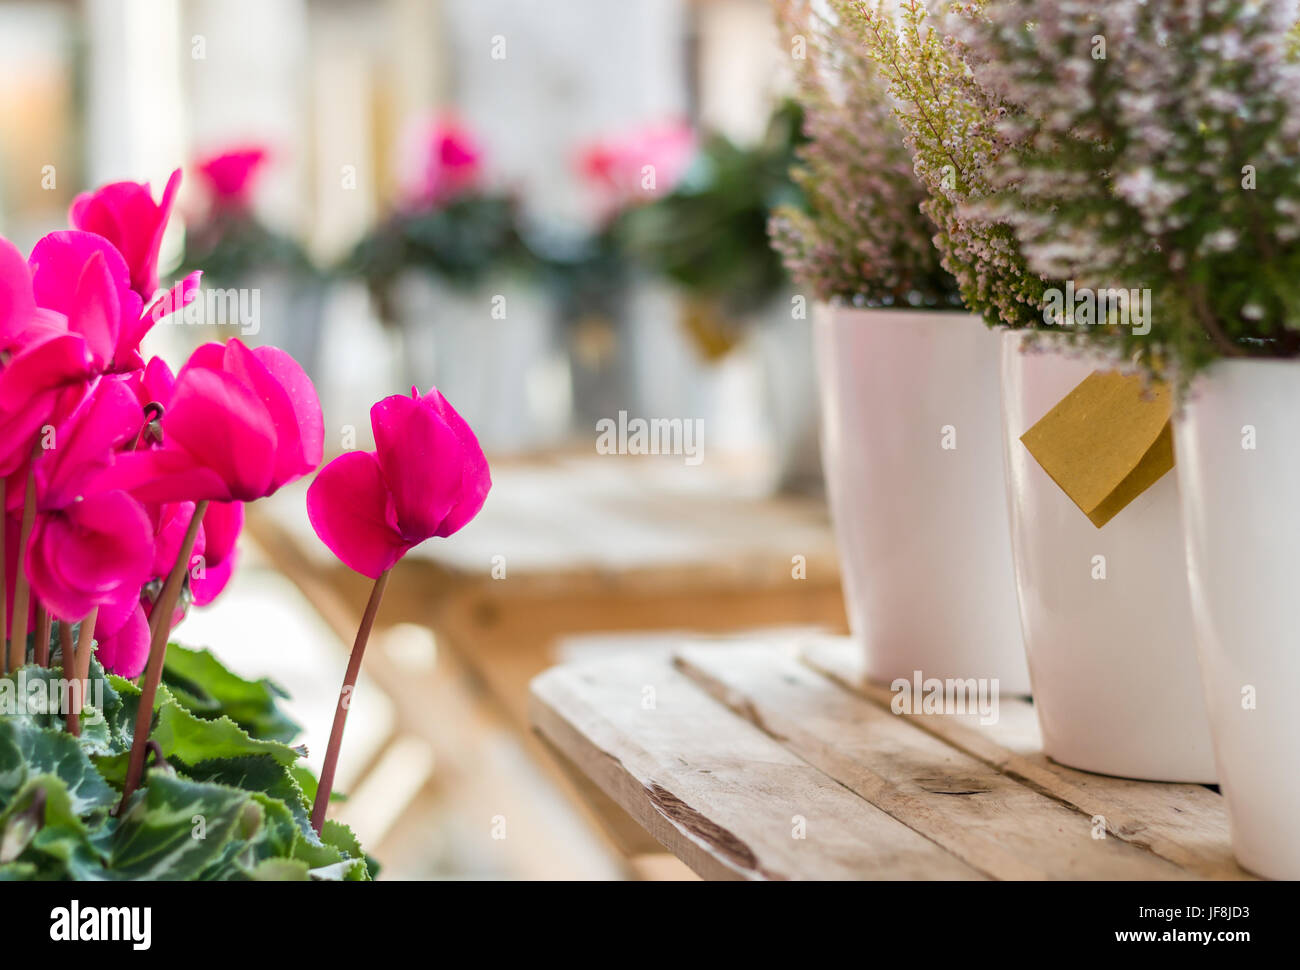 Flowers and plants in pots Stock Photo